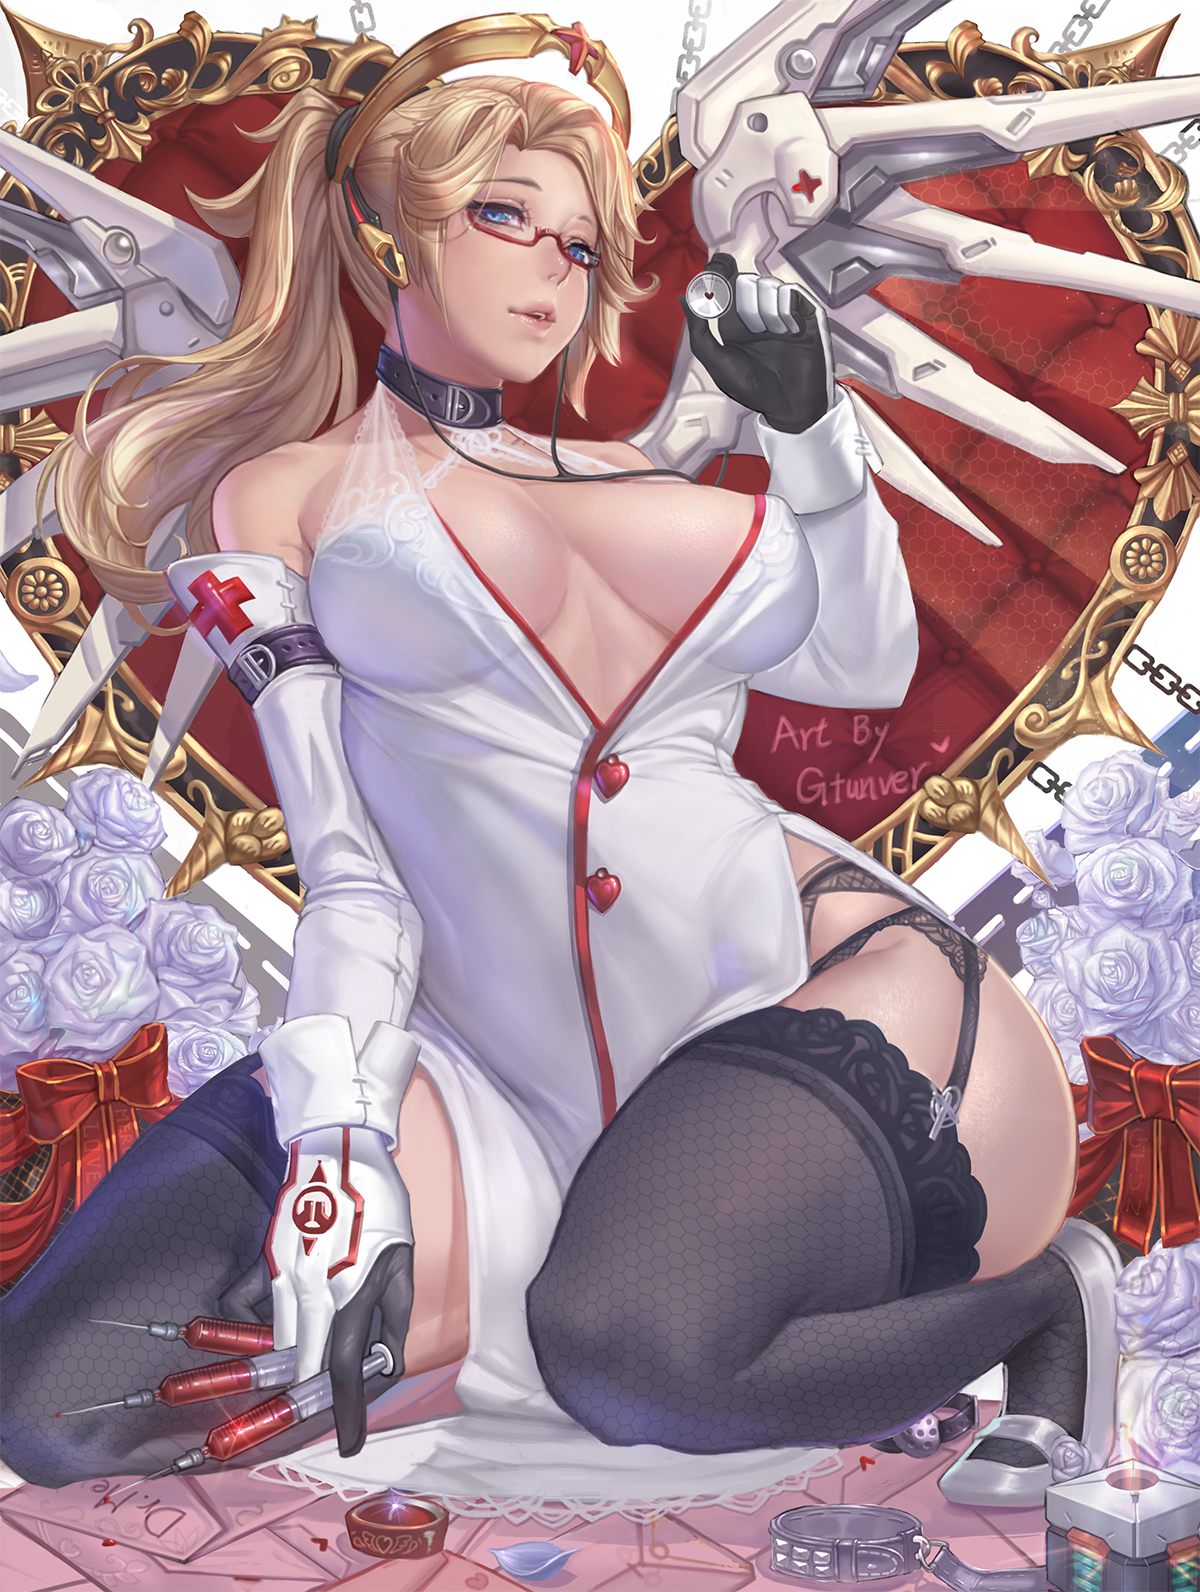 Anime 1200x1592 anime anime girls gtunver portrait display Overwatch Mercy (Overwatch) glasses blonde big boobs thigh-highs black thigh highs cleavage